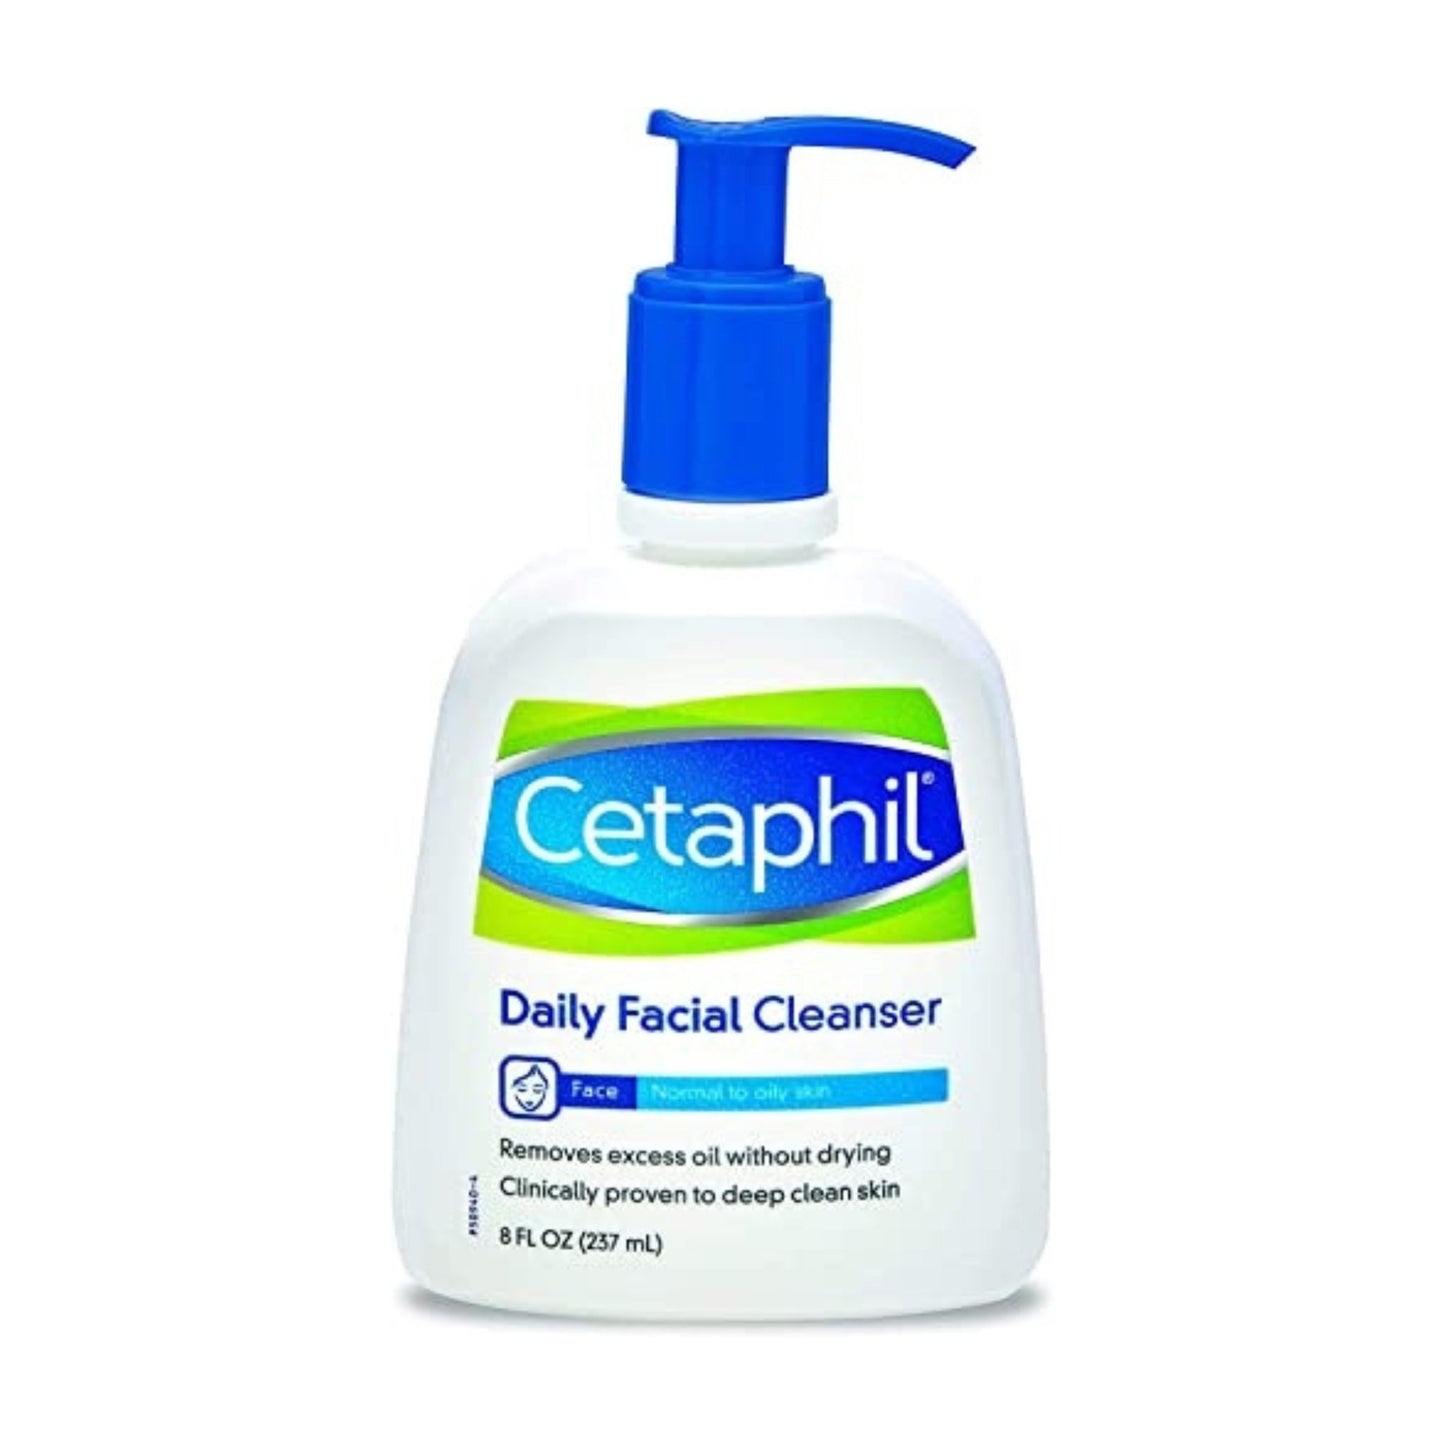 Cetaphil Daily Facial Cleanser for Normal to Oily Skin (237 mL)